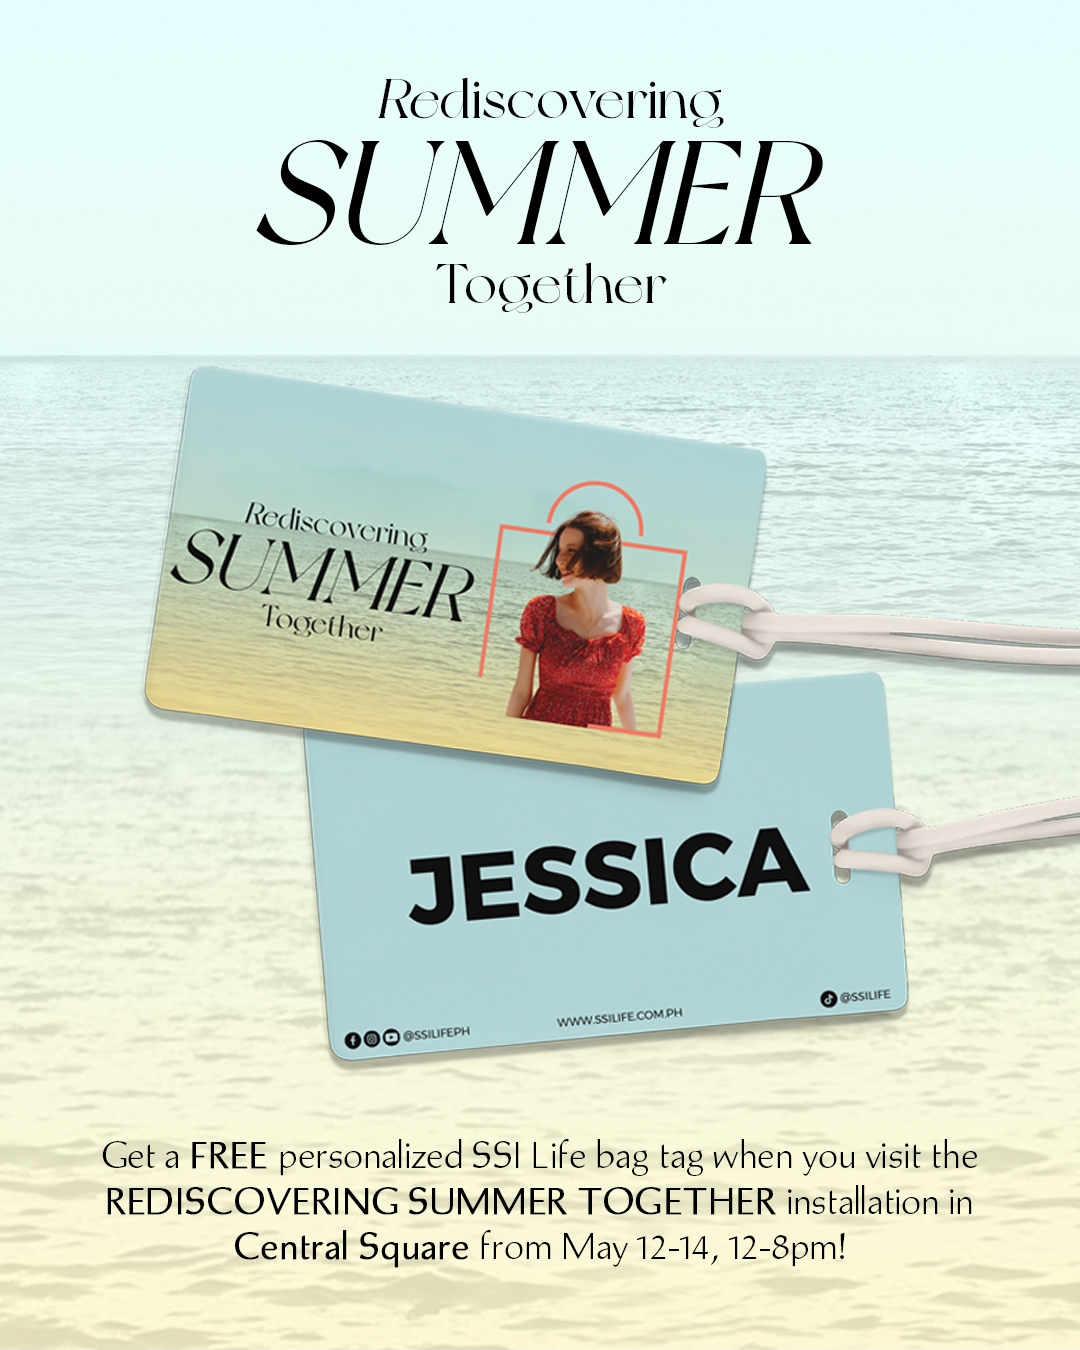 SSI Life's Rediscovering Summer Together Campaign